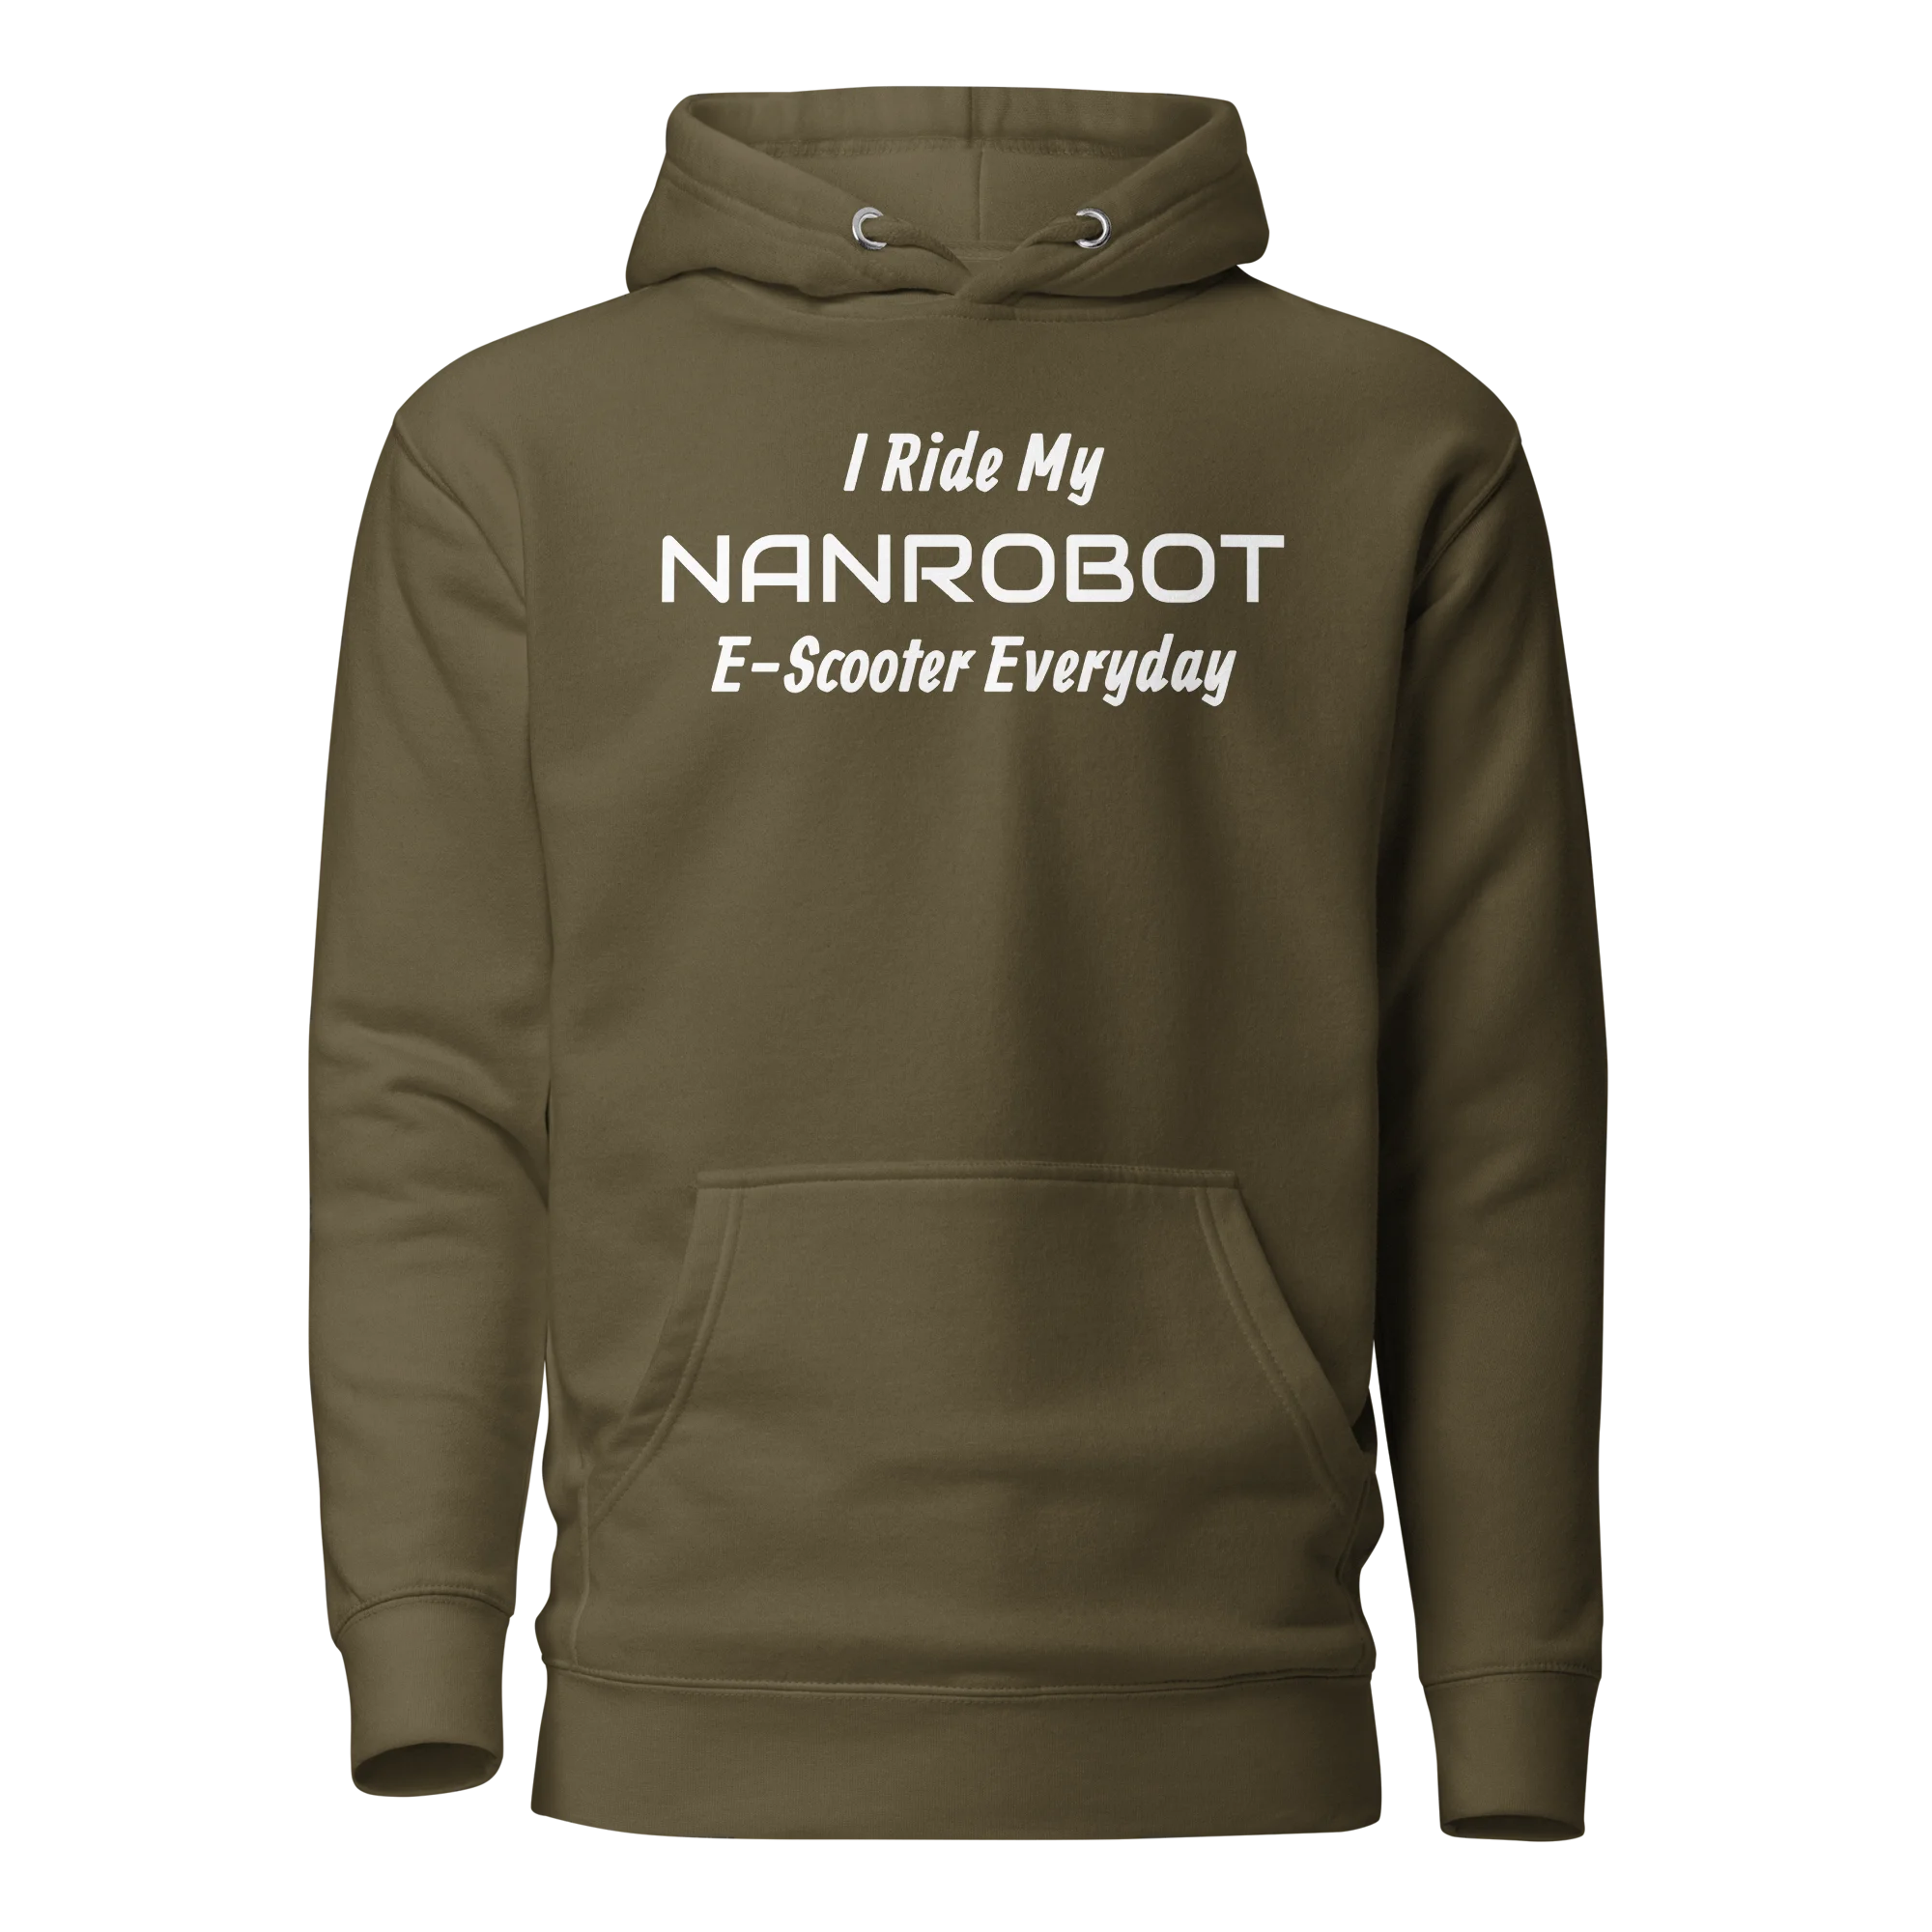 E-Scooter Graphic Hoodie: I Ride My NANROBOT Everyday (Military Green)